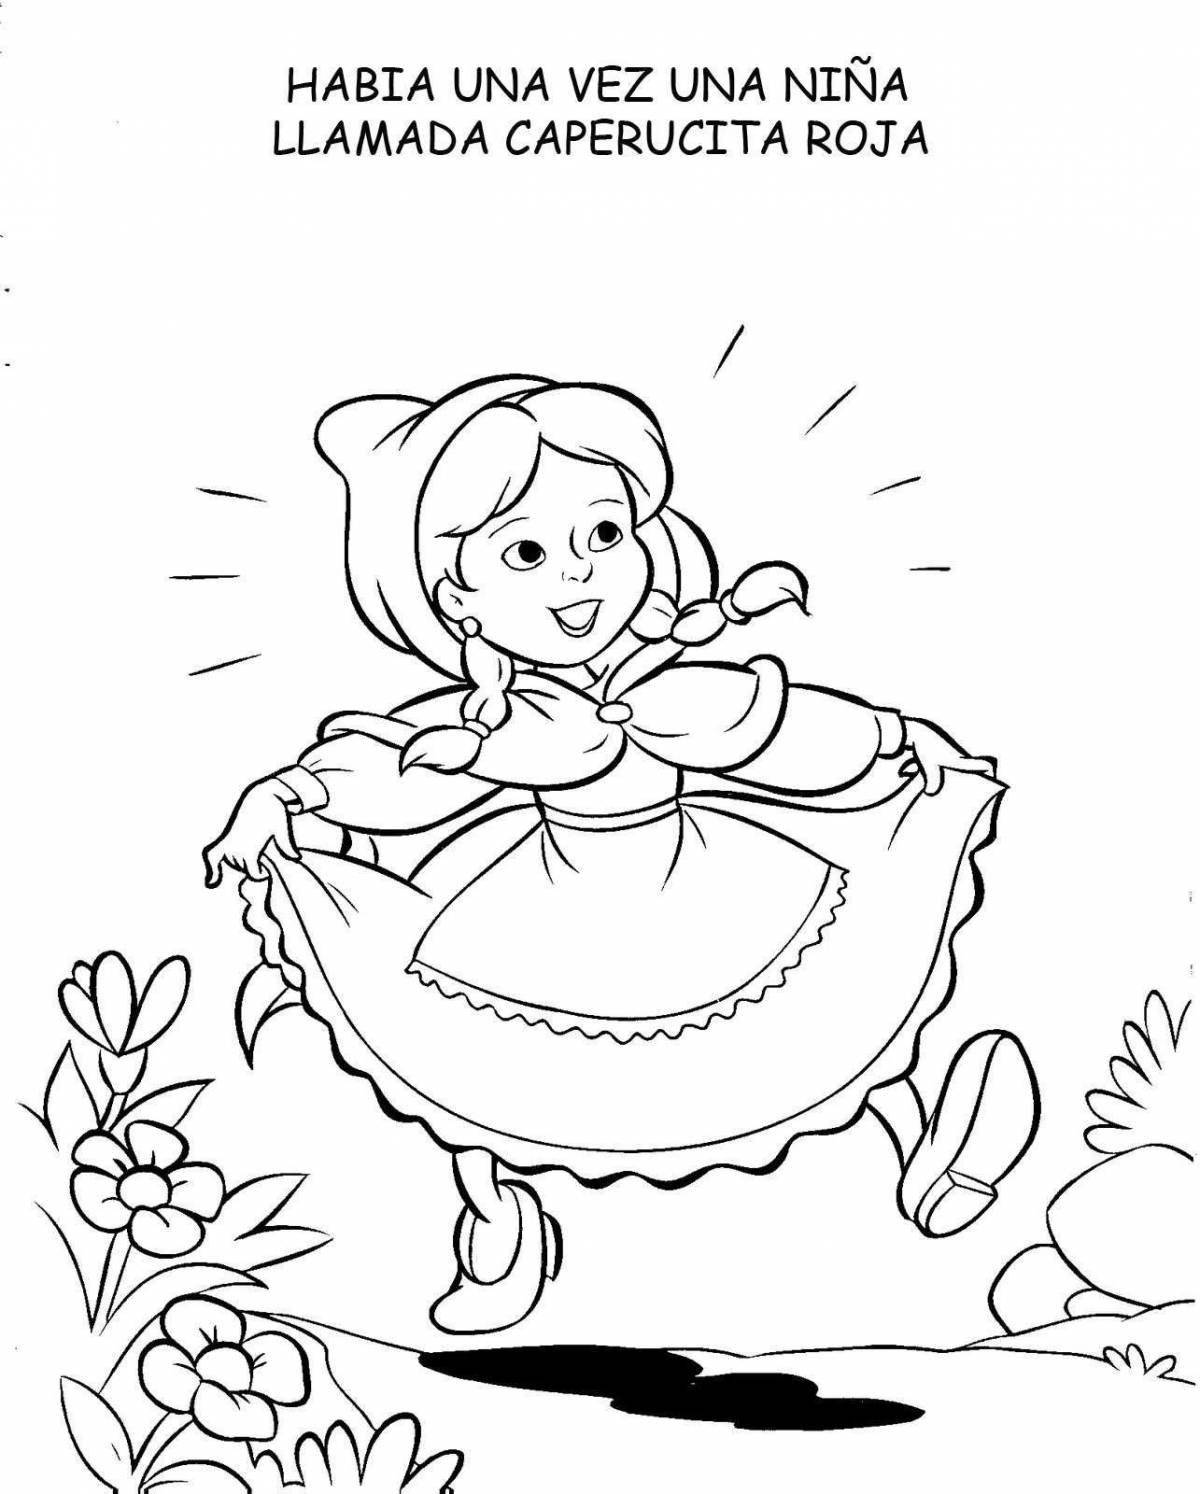 Fun little red riding hood coloring book